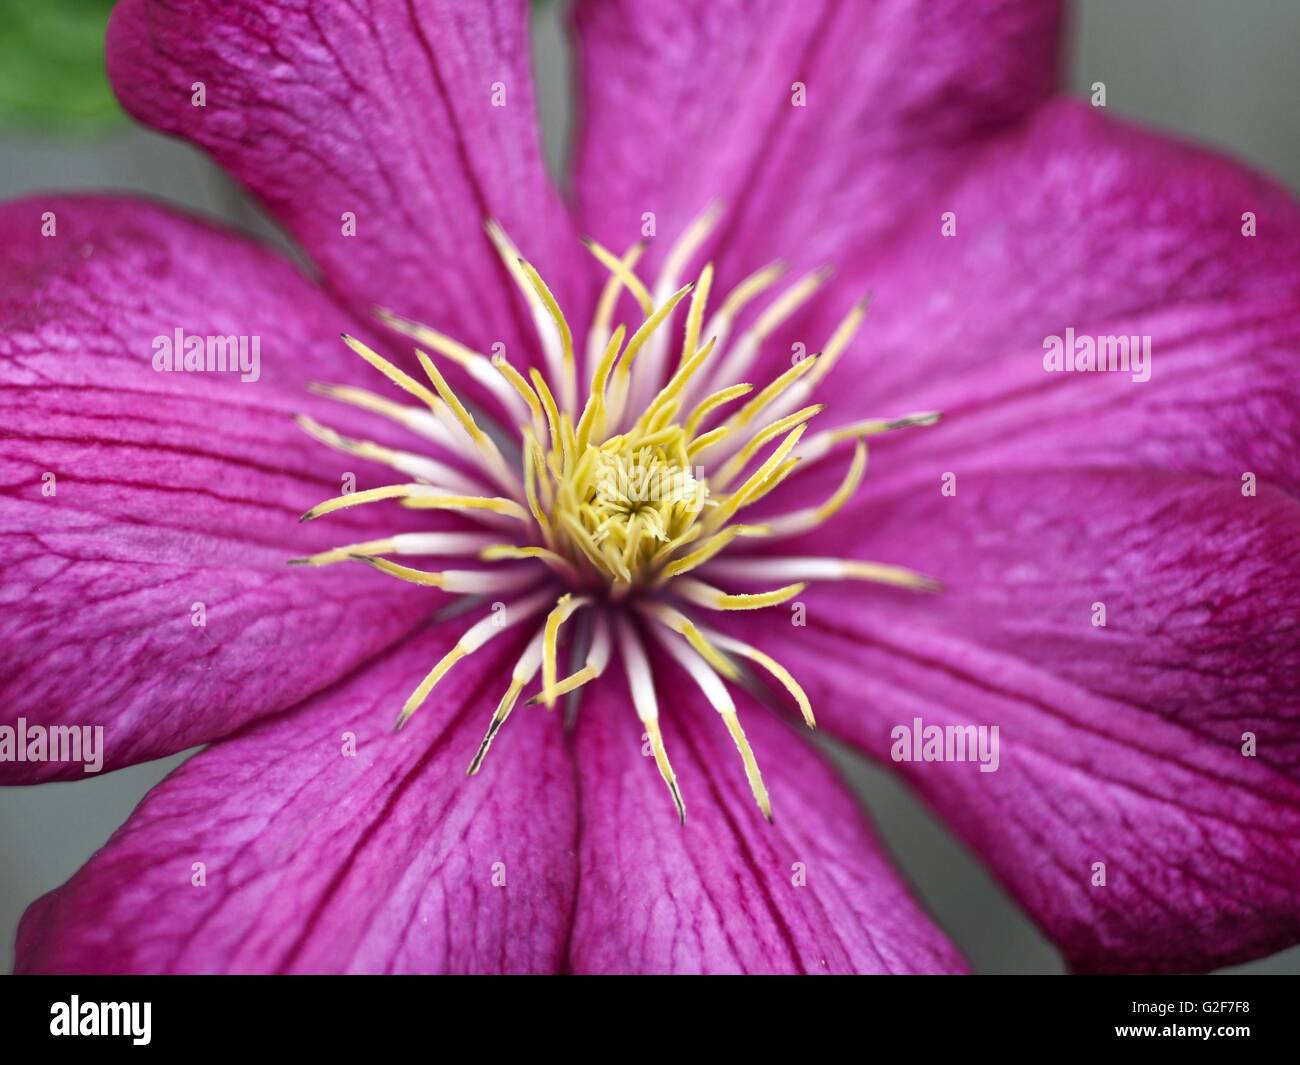 Purple clematis flower with yellow centre stamens Stock Photo